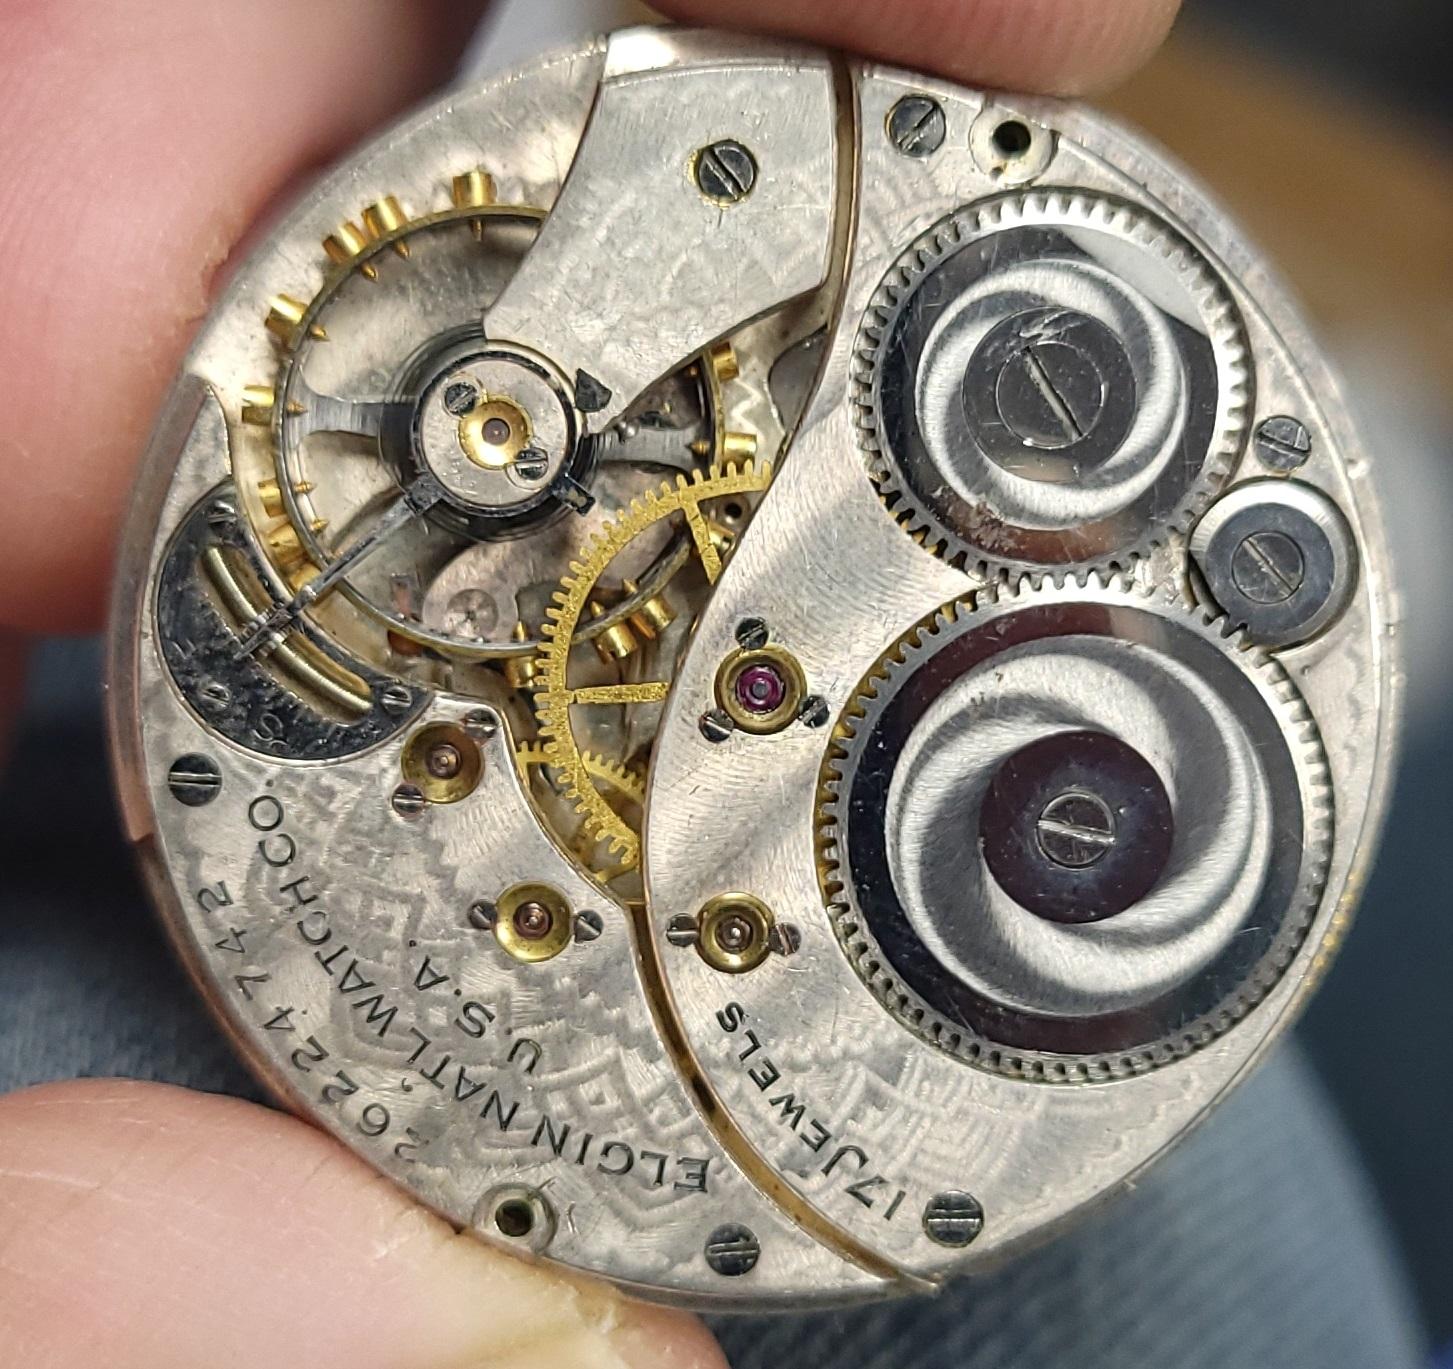 Diving into watch repair - Introduce Yourself Here - Watch Repair Talk